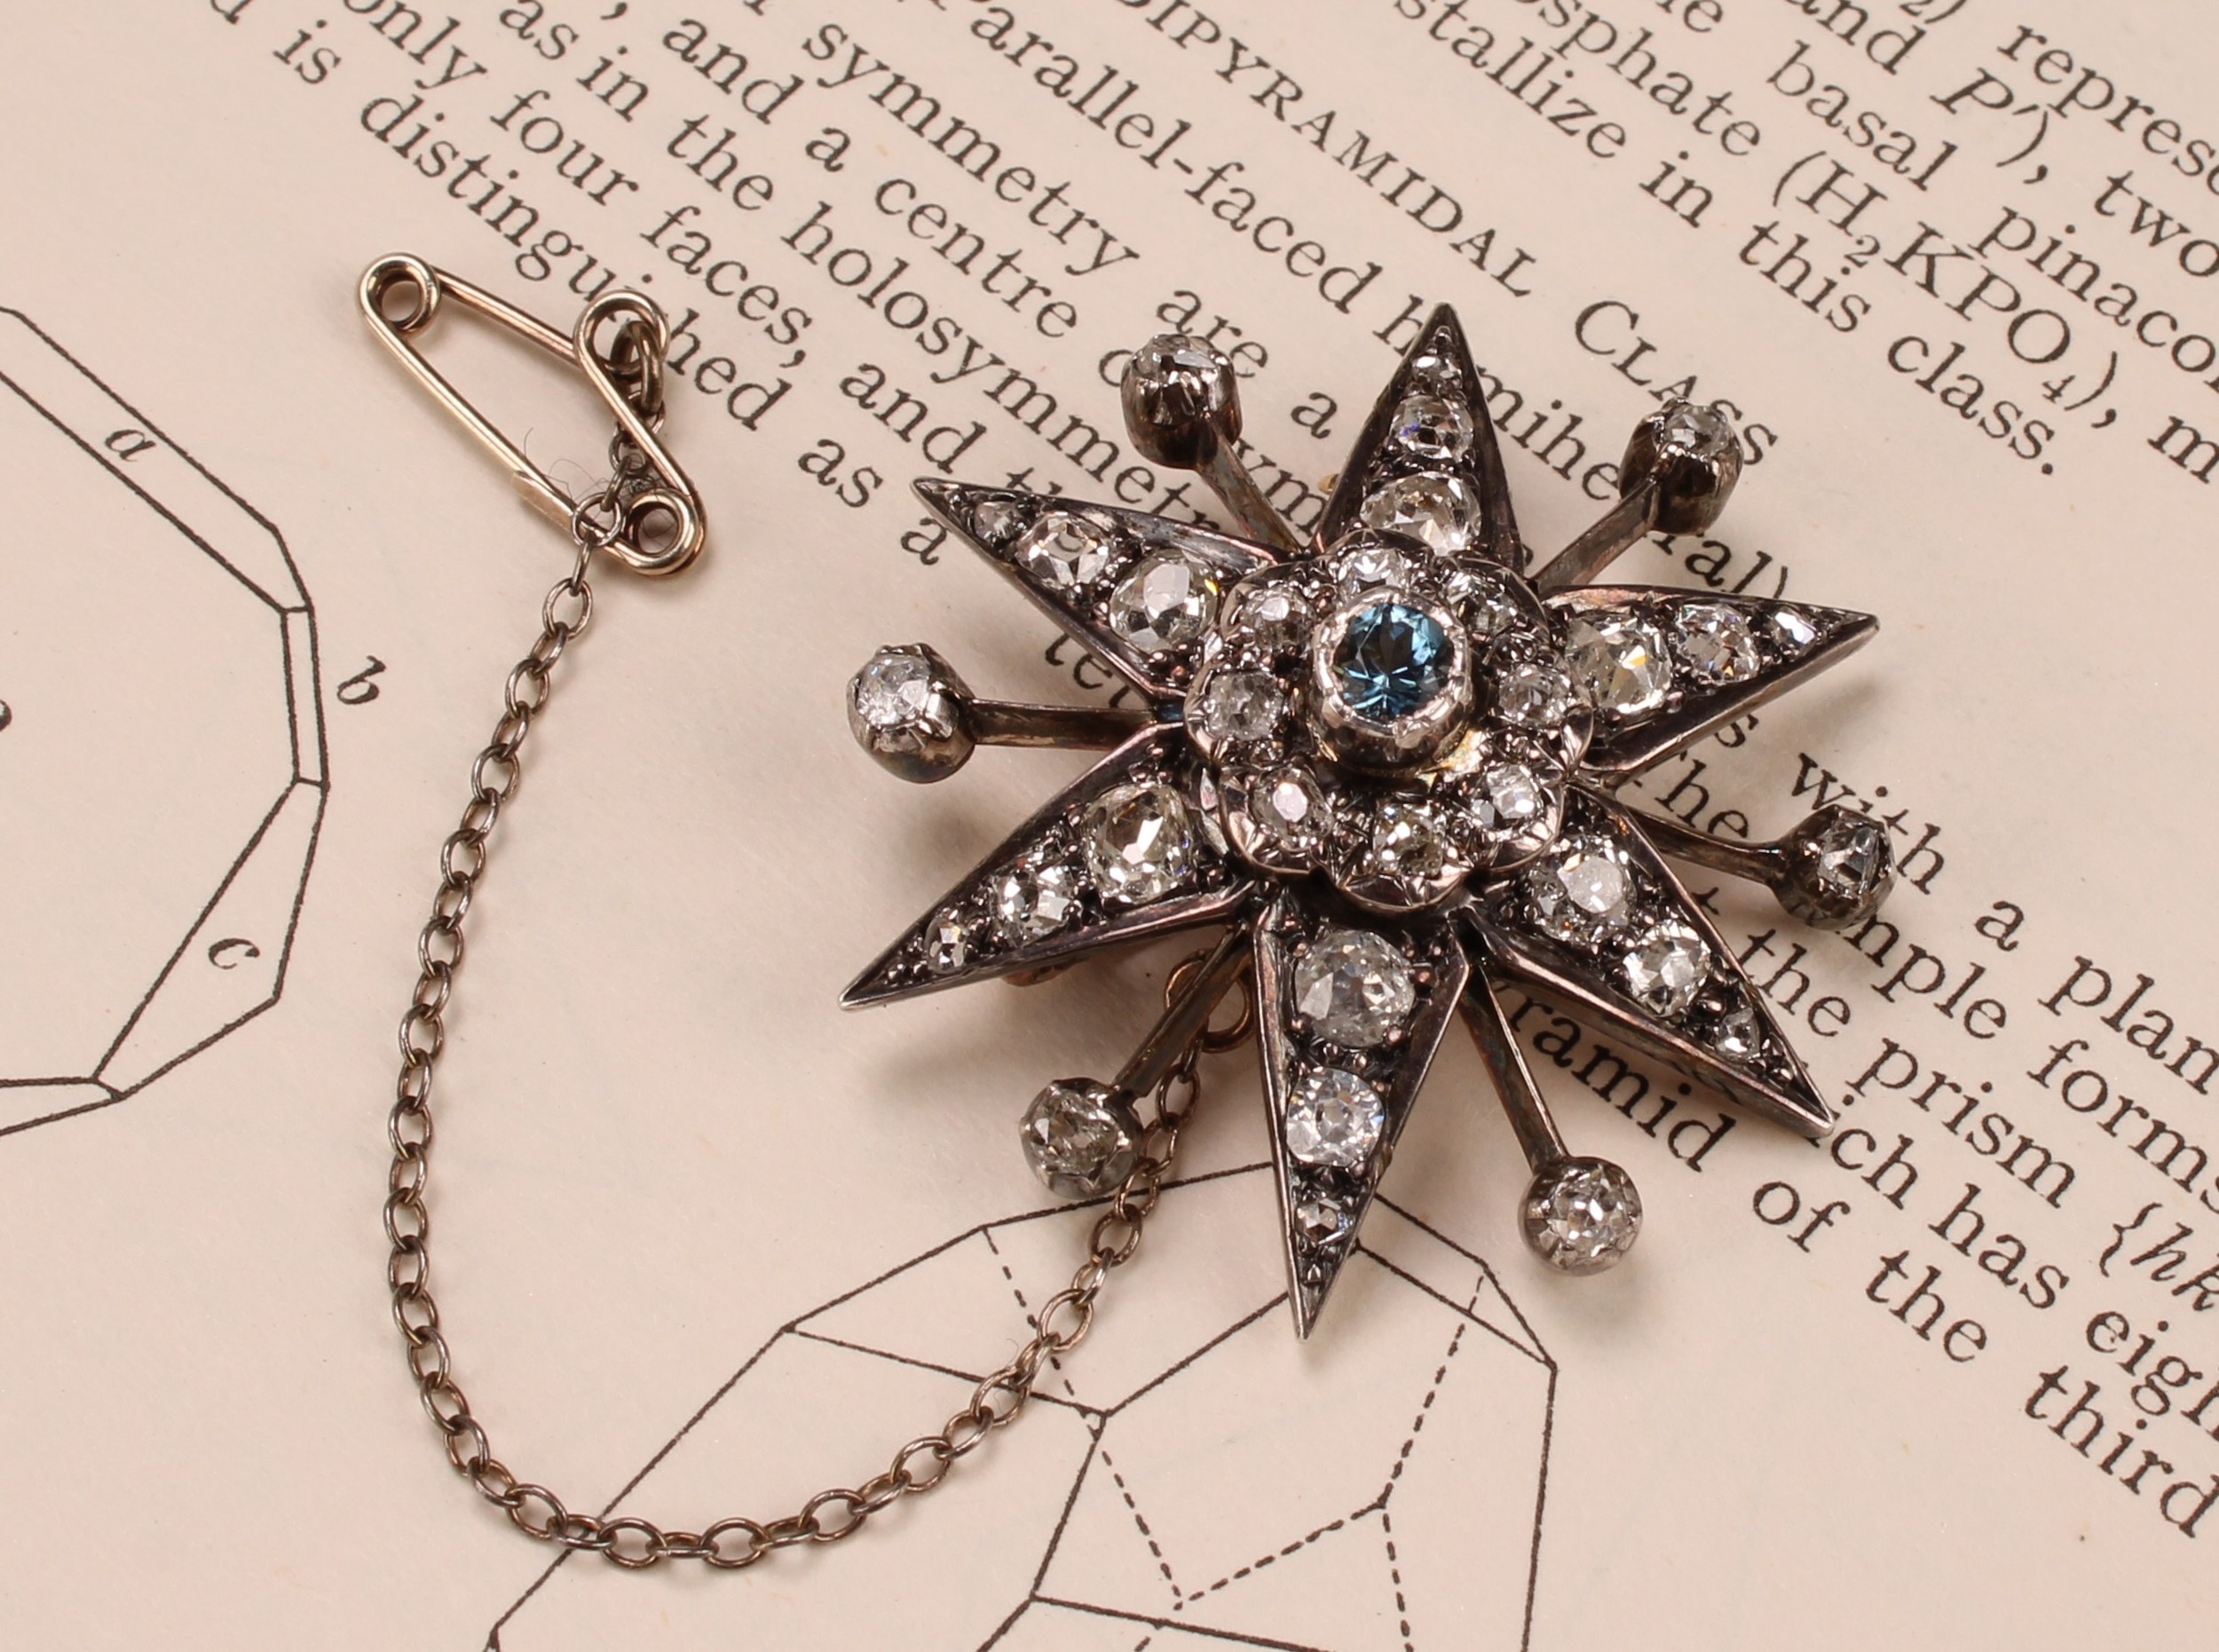 A diamond radiating starburst brooch, set with old cut stones, the central stone a faceted